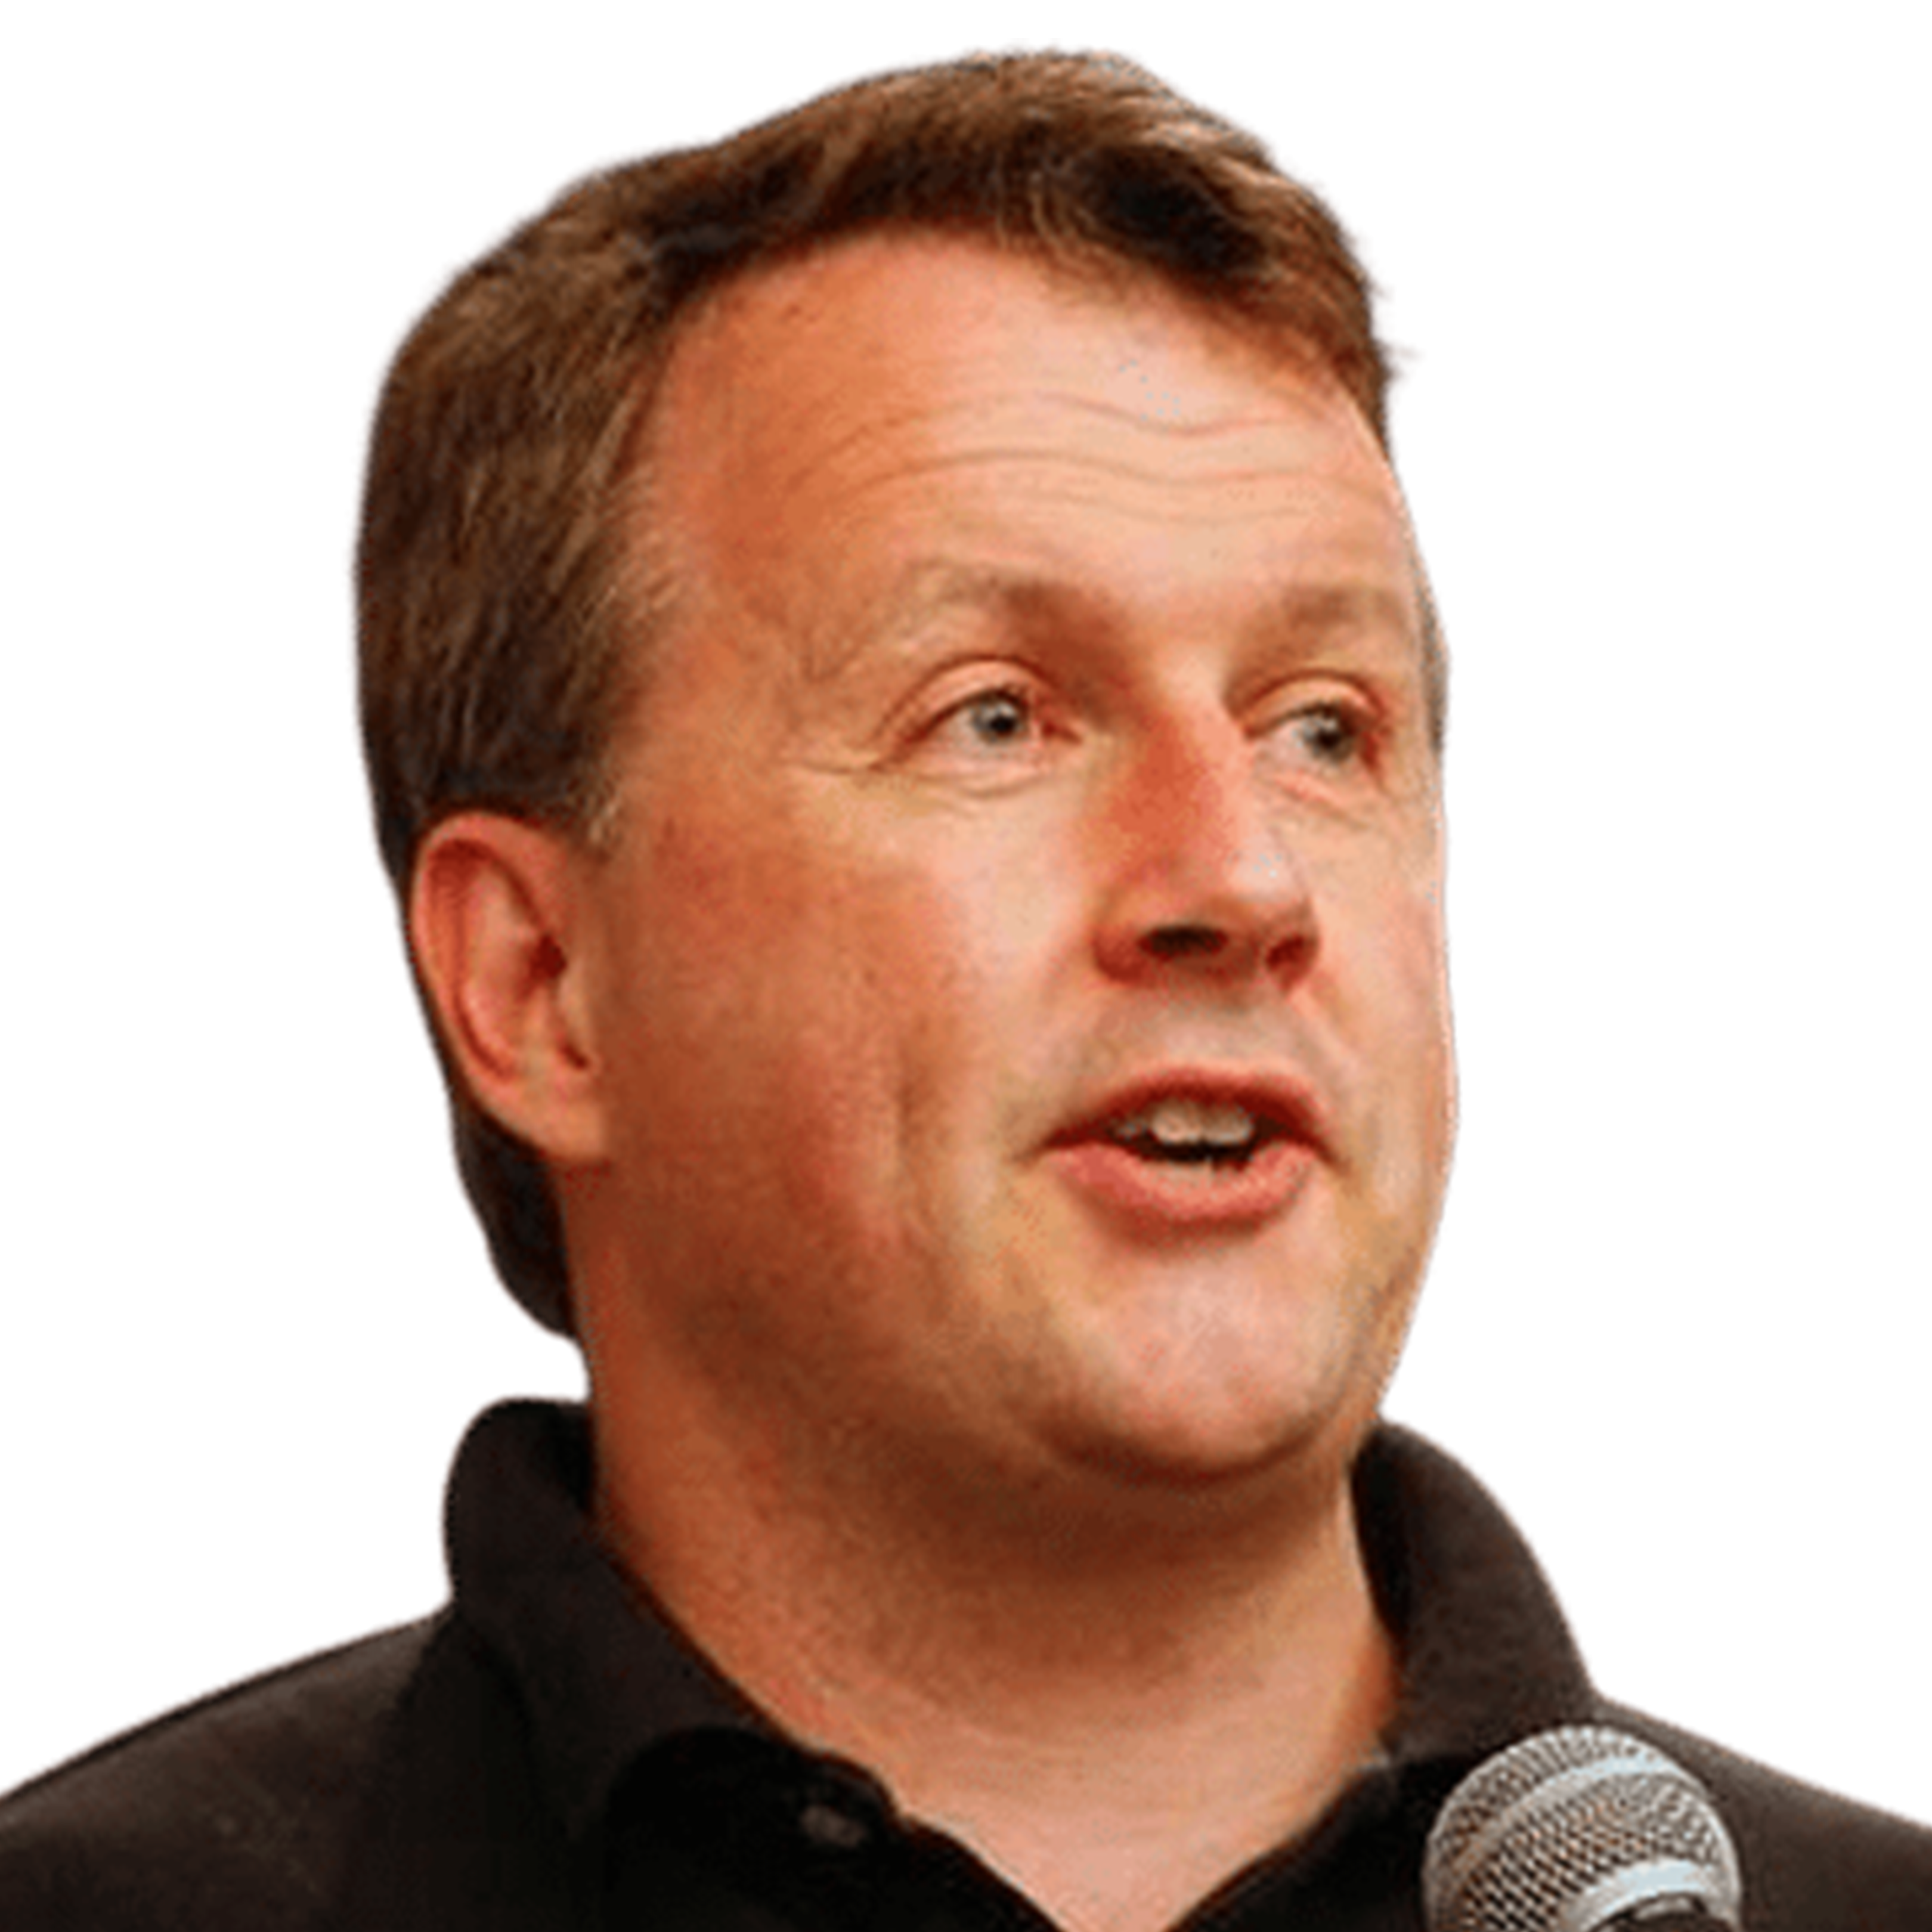 Paul Graham, Ycombinator, Business Motivations, Hire, Remote Employees, Ecommerce, Team, Virtual Employees, United States, Canada, E-Commerce, Retail, Fashion, Jewelry, Fashion, Shoes, T-shirt, Website, Digital Marketing, social media, Graphic Design, Advertising, Entrepreneurs, Business Owners, Subscribe, Credit Card 